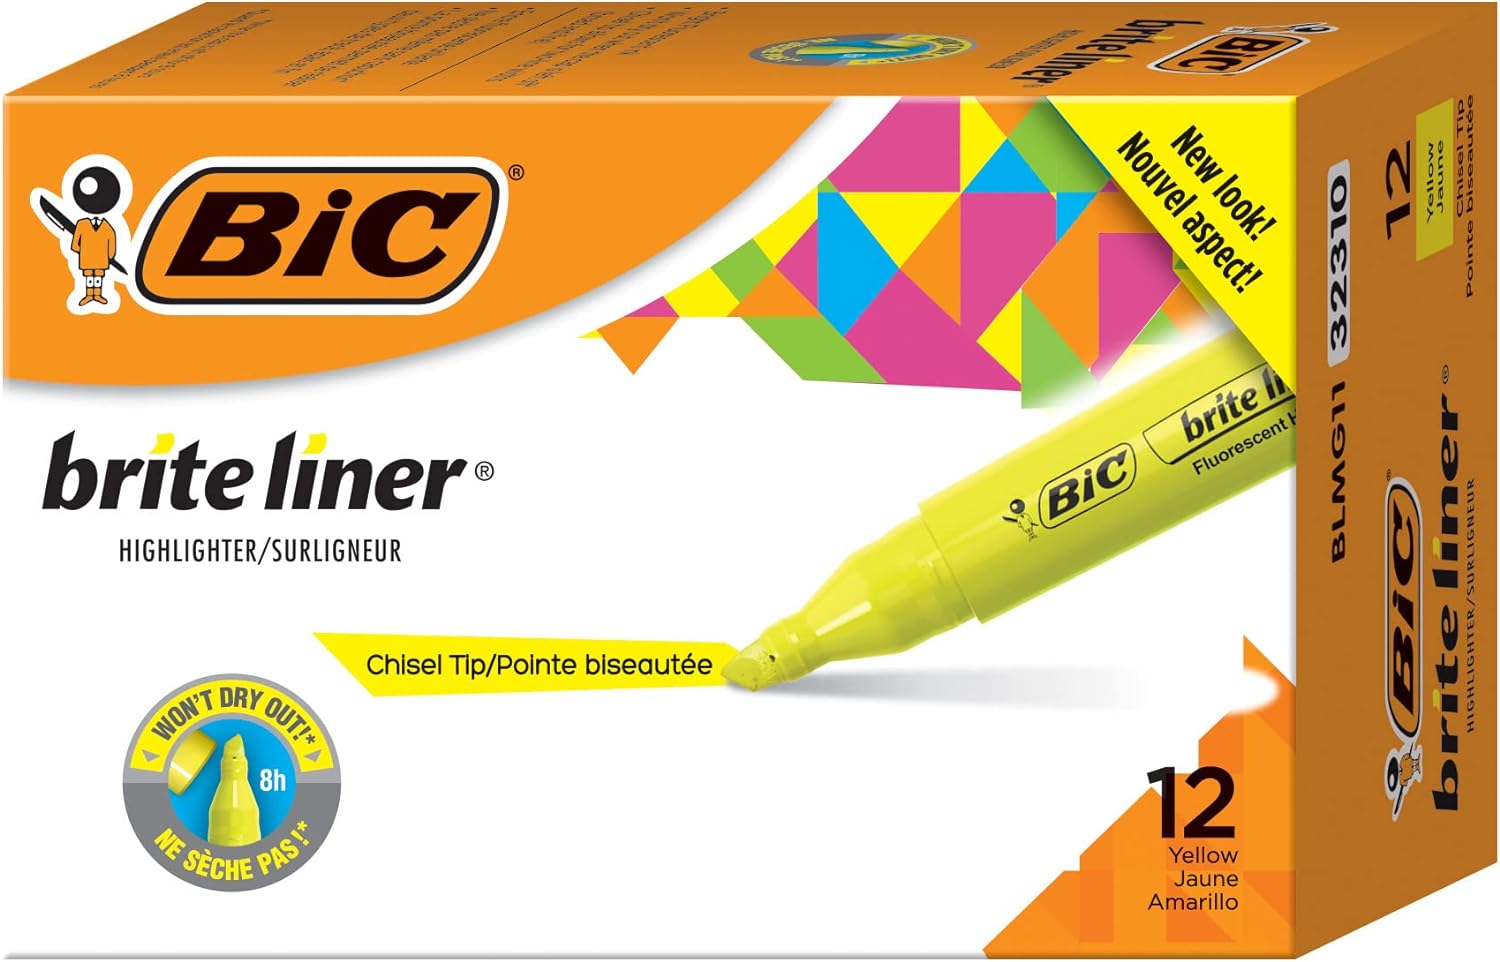 Works like a highlighter should!! Inexpensive and comfortable to hold.